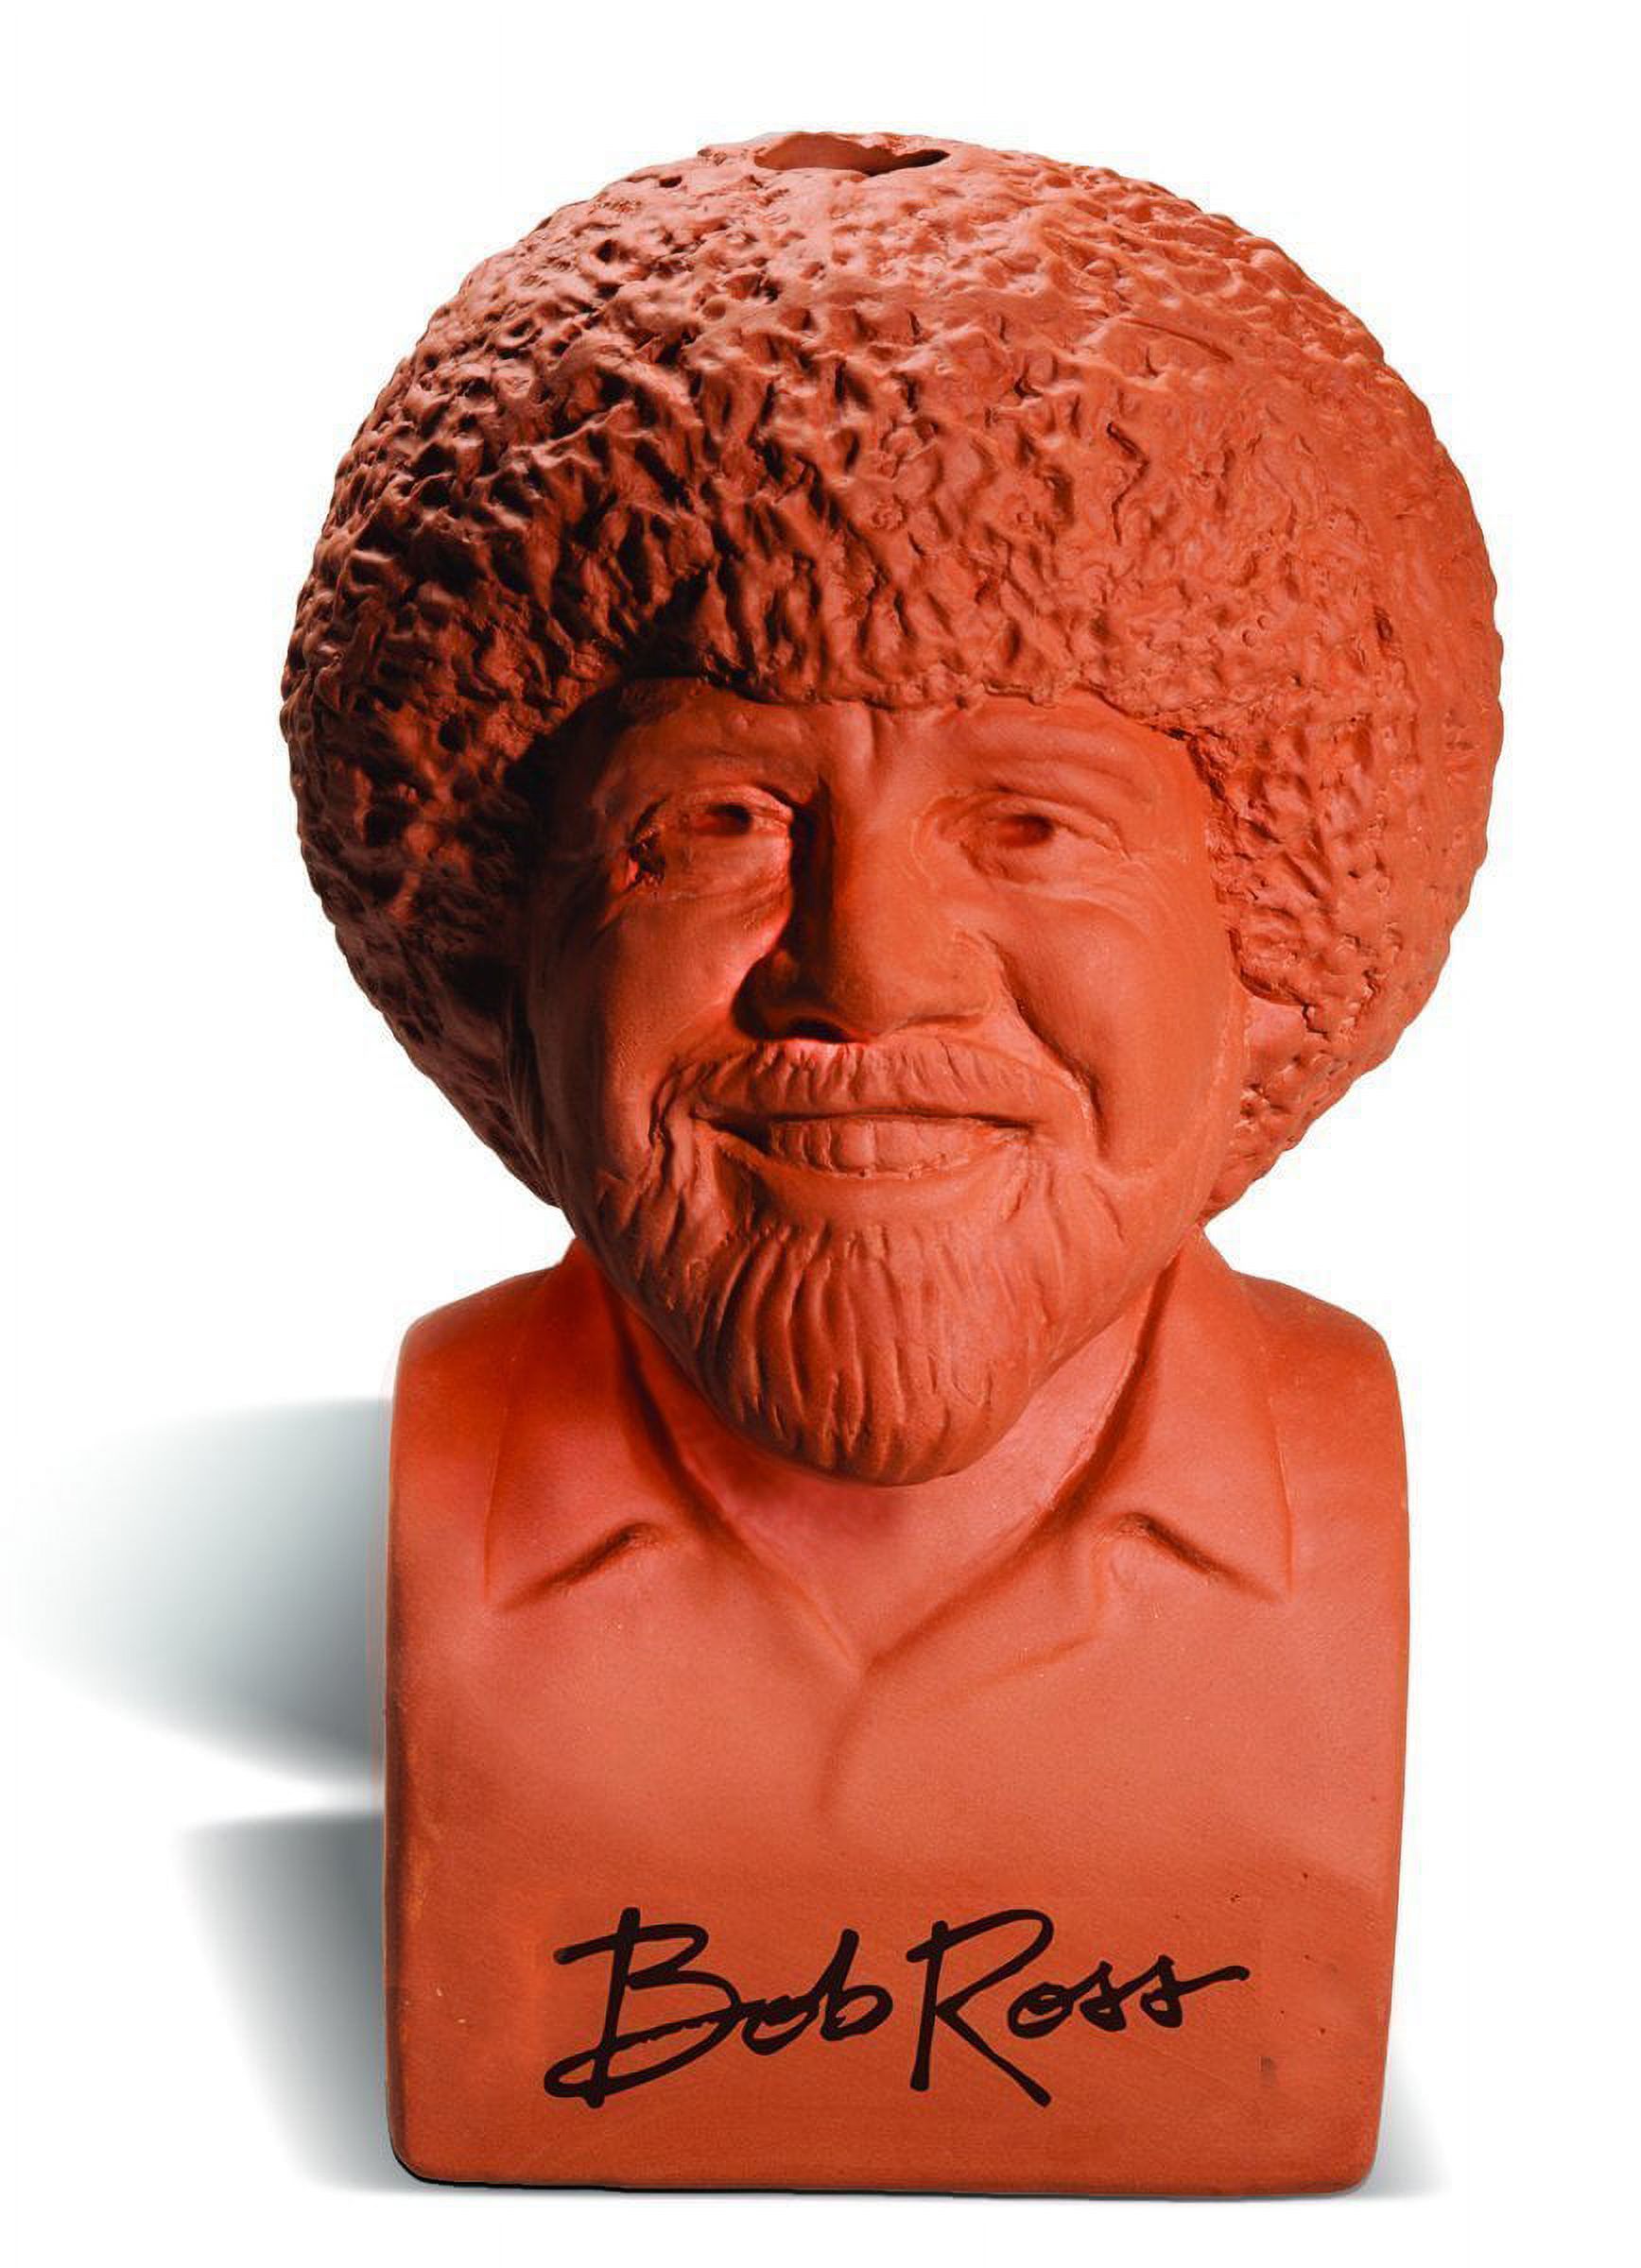 Chia Pet Bob Ross (The Joy of Painting) - Decorative Pot Easy to Do Fun to Grow Chia Seeds Novelty Gift - image 5 of 5